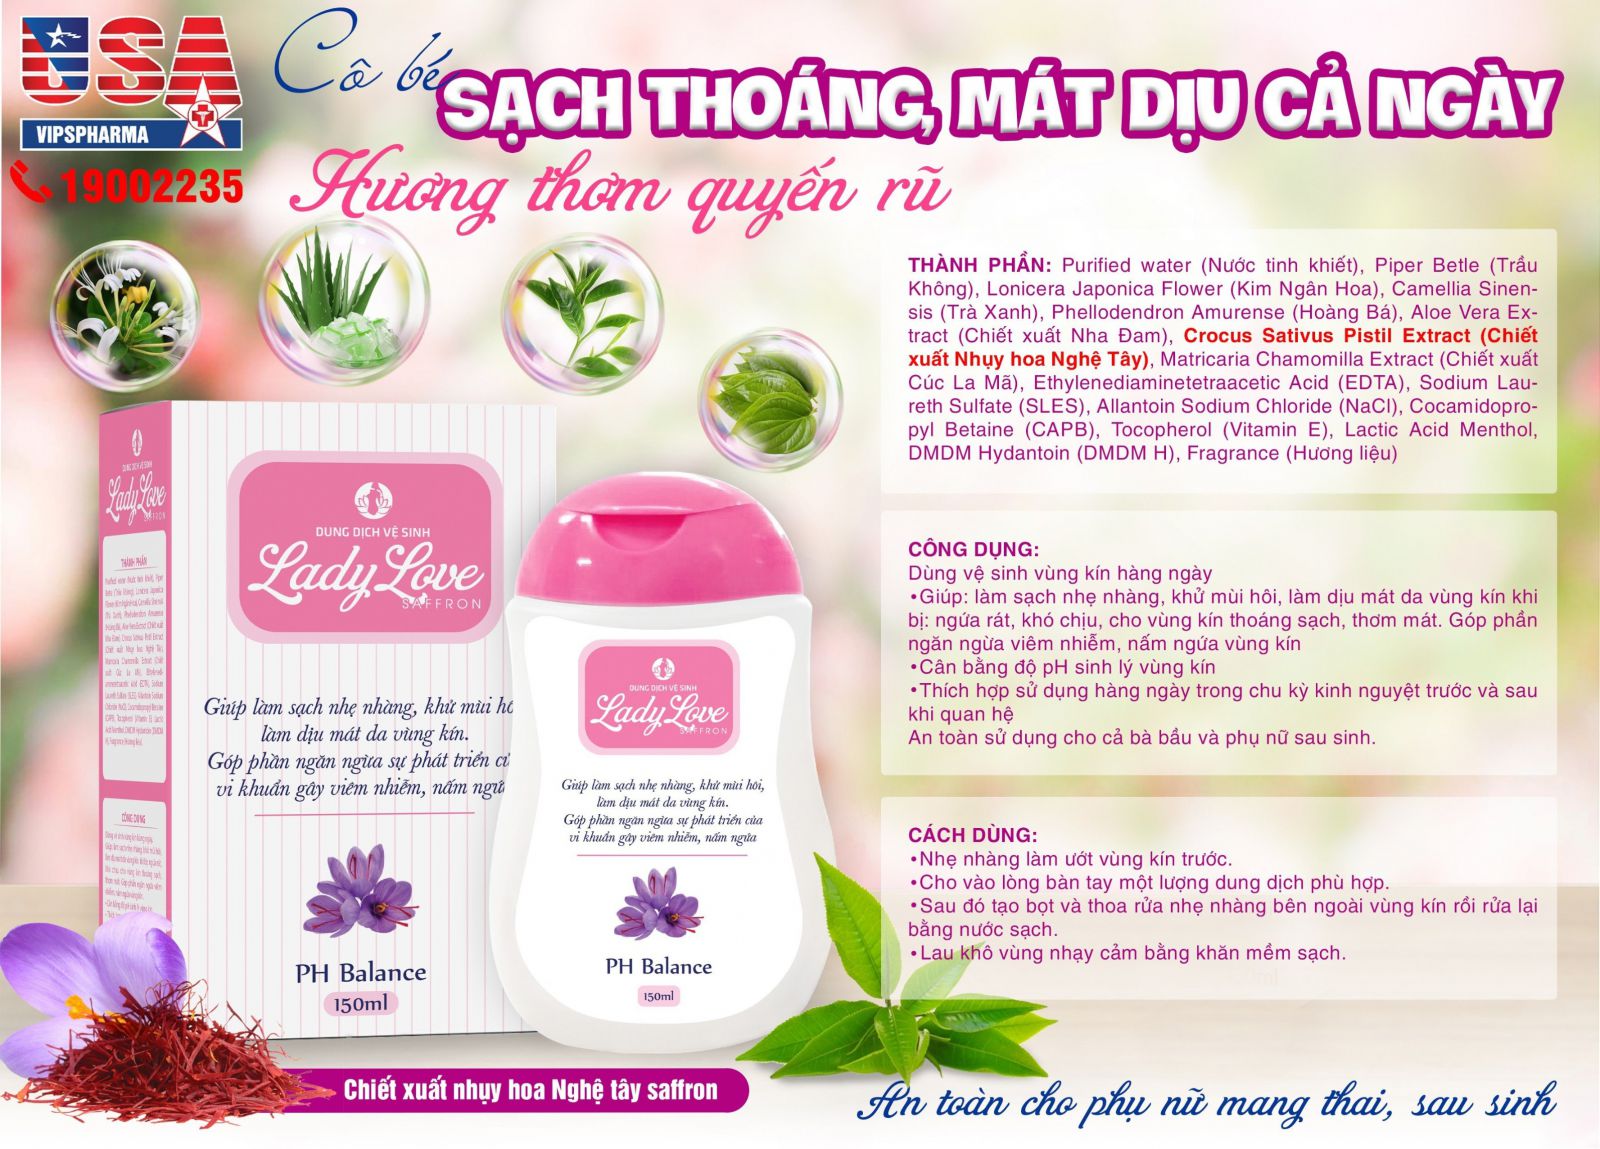 Dung dịch vệ sinh Lady Love